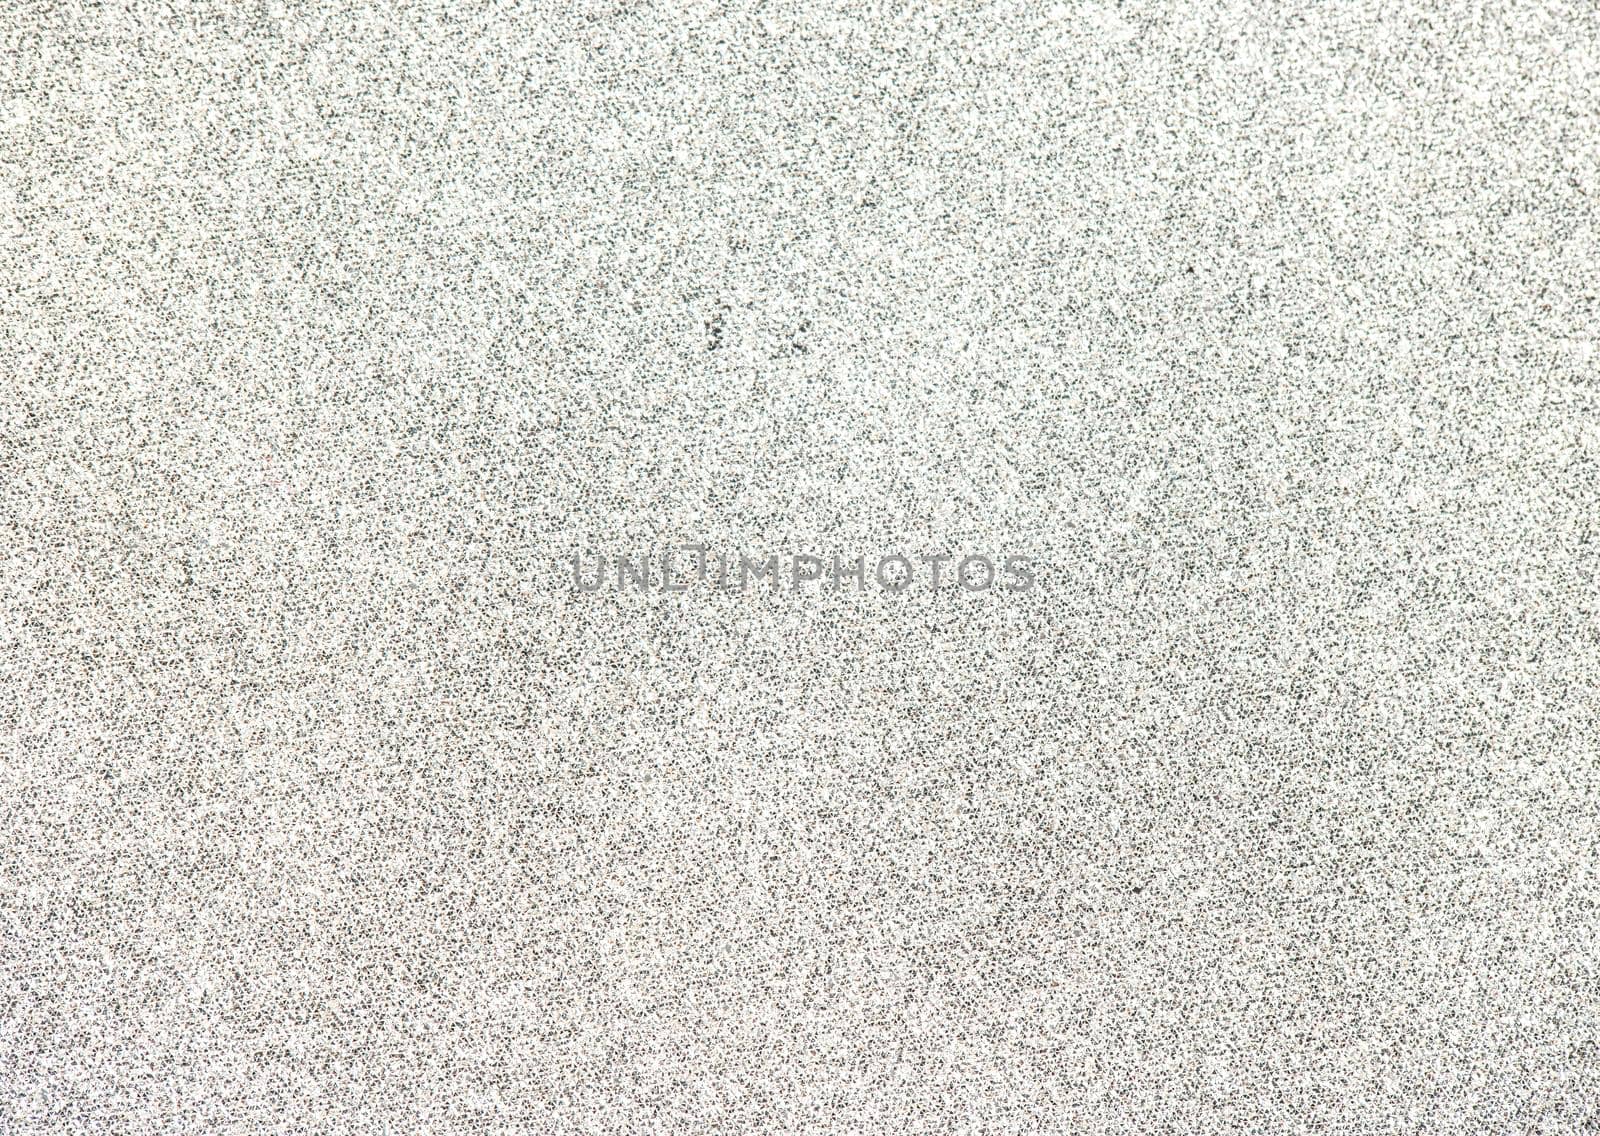 Light silver metal background close up